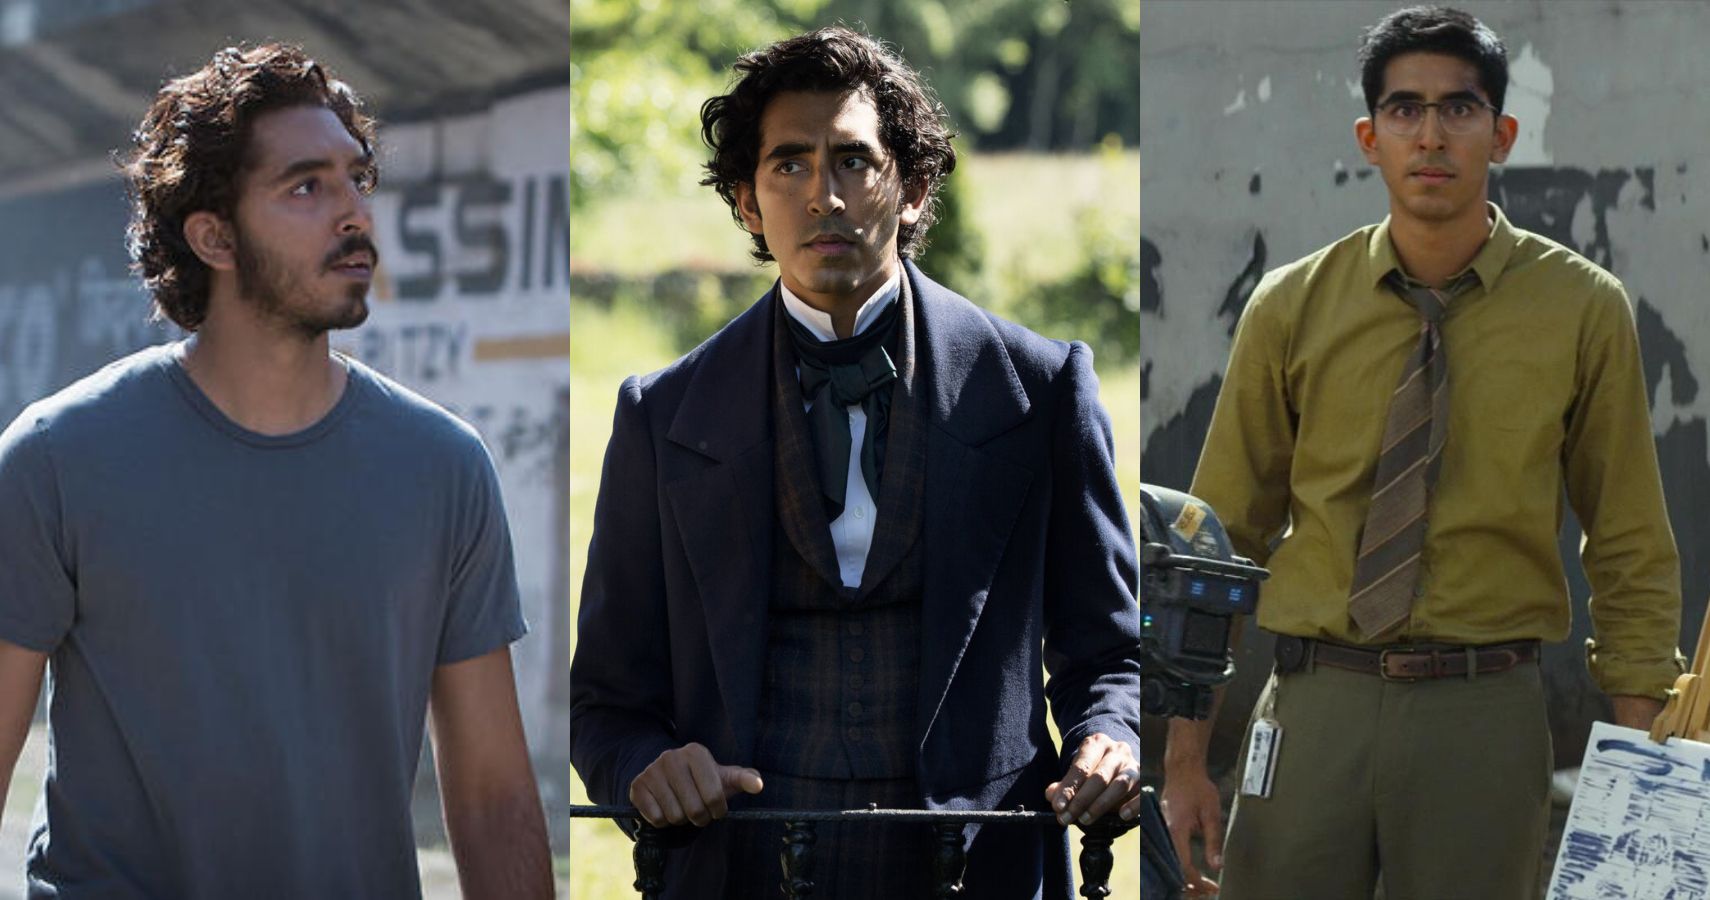 0 Best Dev Patel Films Ranked, According To Rotten Tomatoes